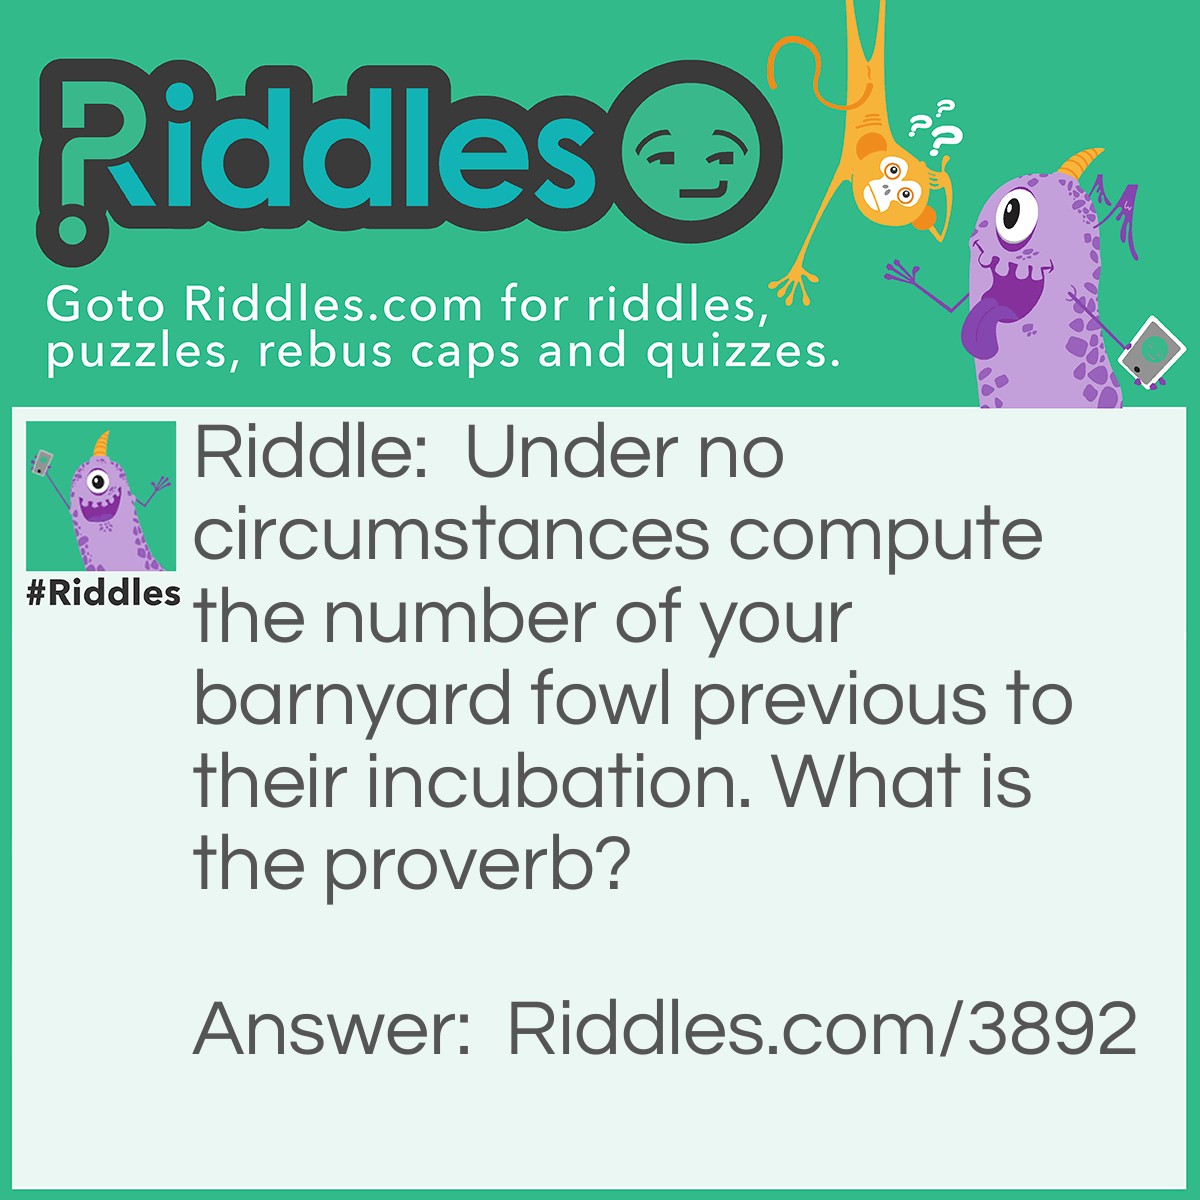 Riddle: Under no circumstances compute the number of your barnyard fowl previous to their incubation. What is the proverb? Answer: Do not count your chickens before they hatch.